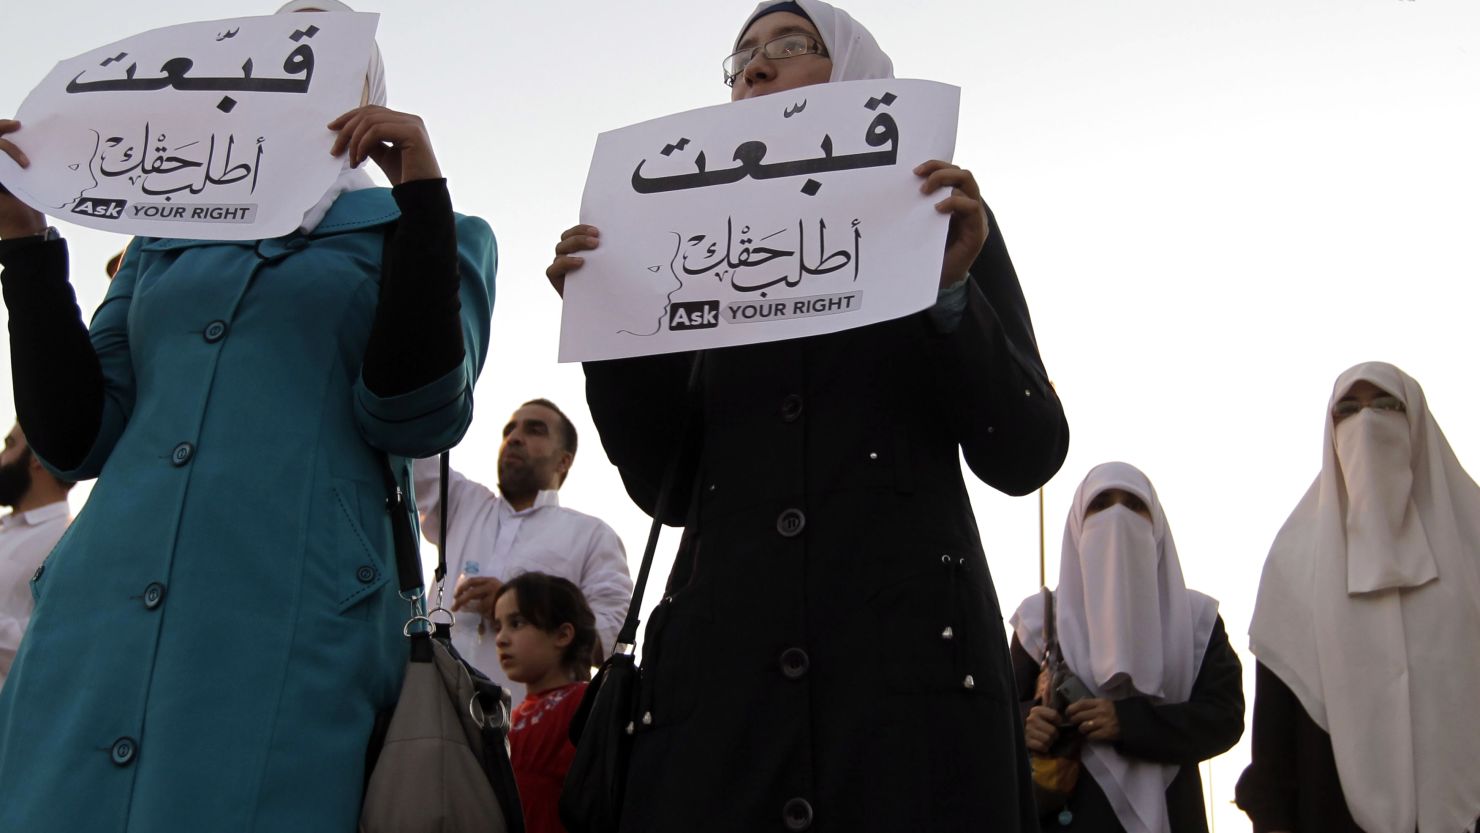 Jordanian women hold up signs that say "ask for your rights."